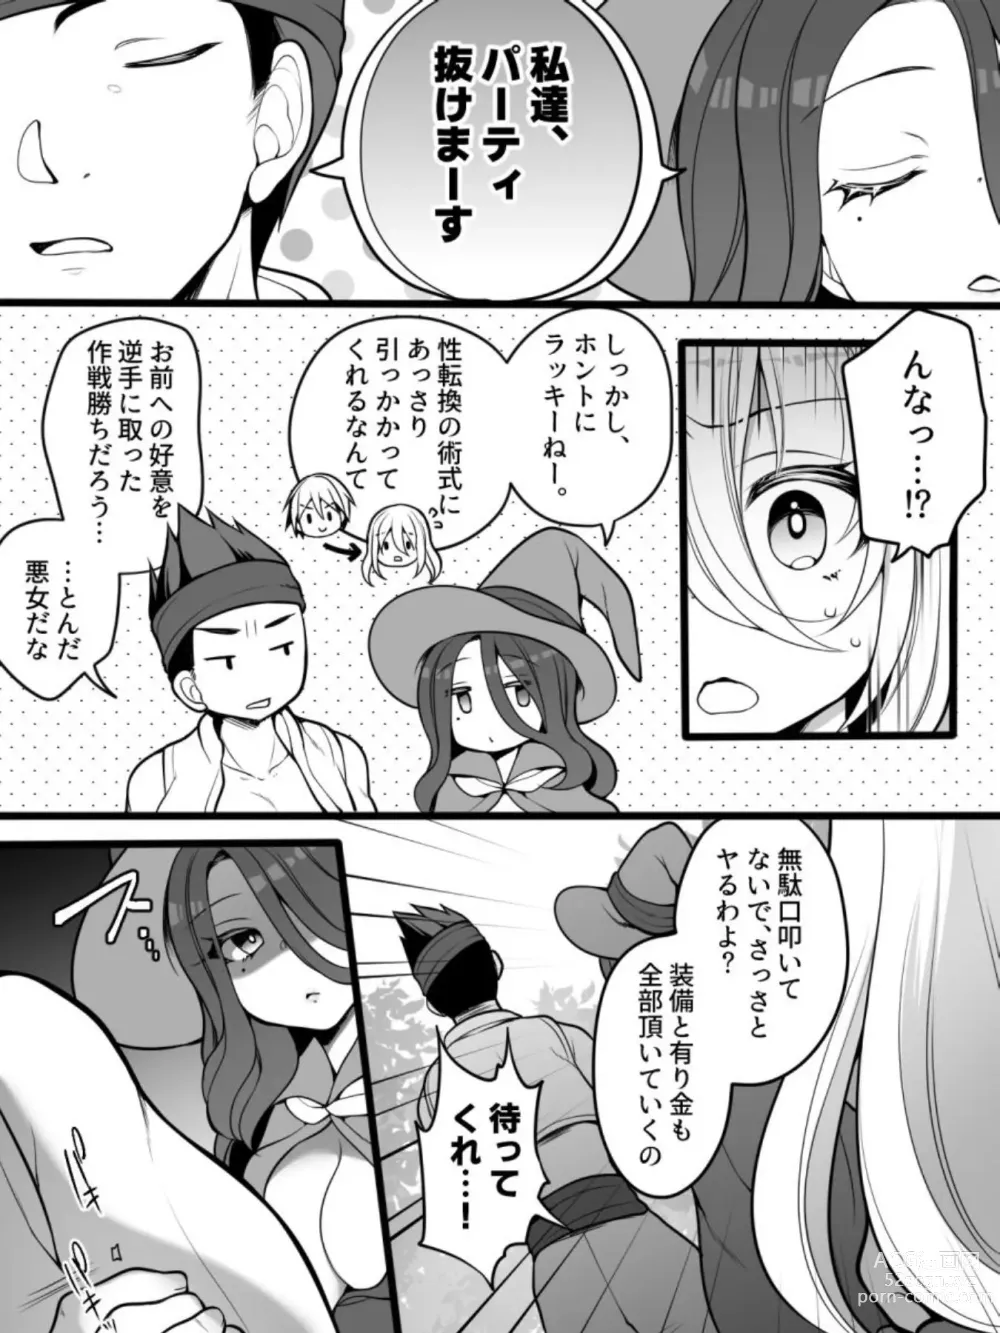 Page 3 of doujinshi TS Impregnated Princess ~A story about a former hero who becomes the princess of a group of orcs~